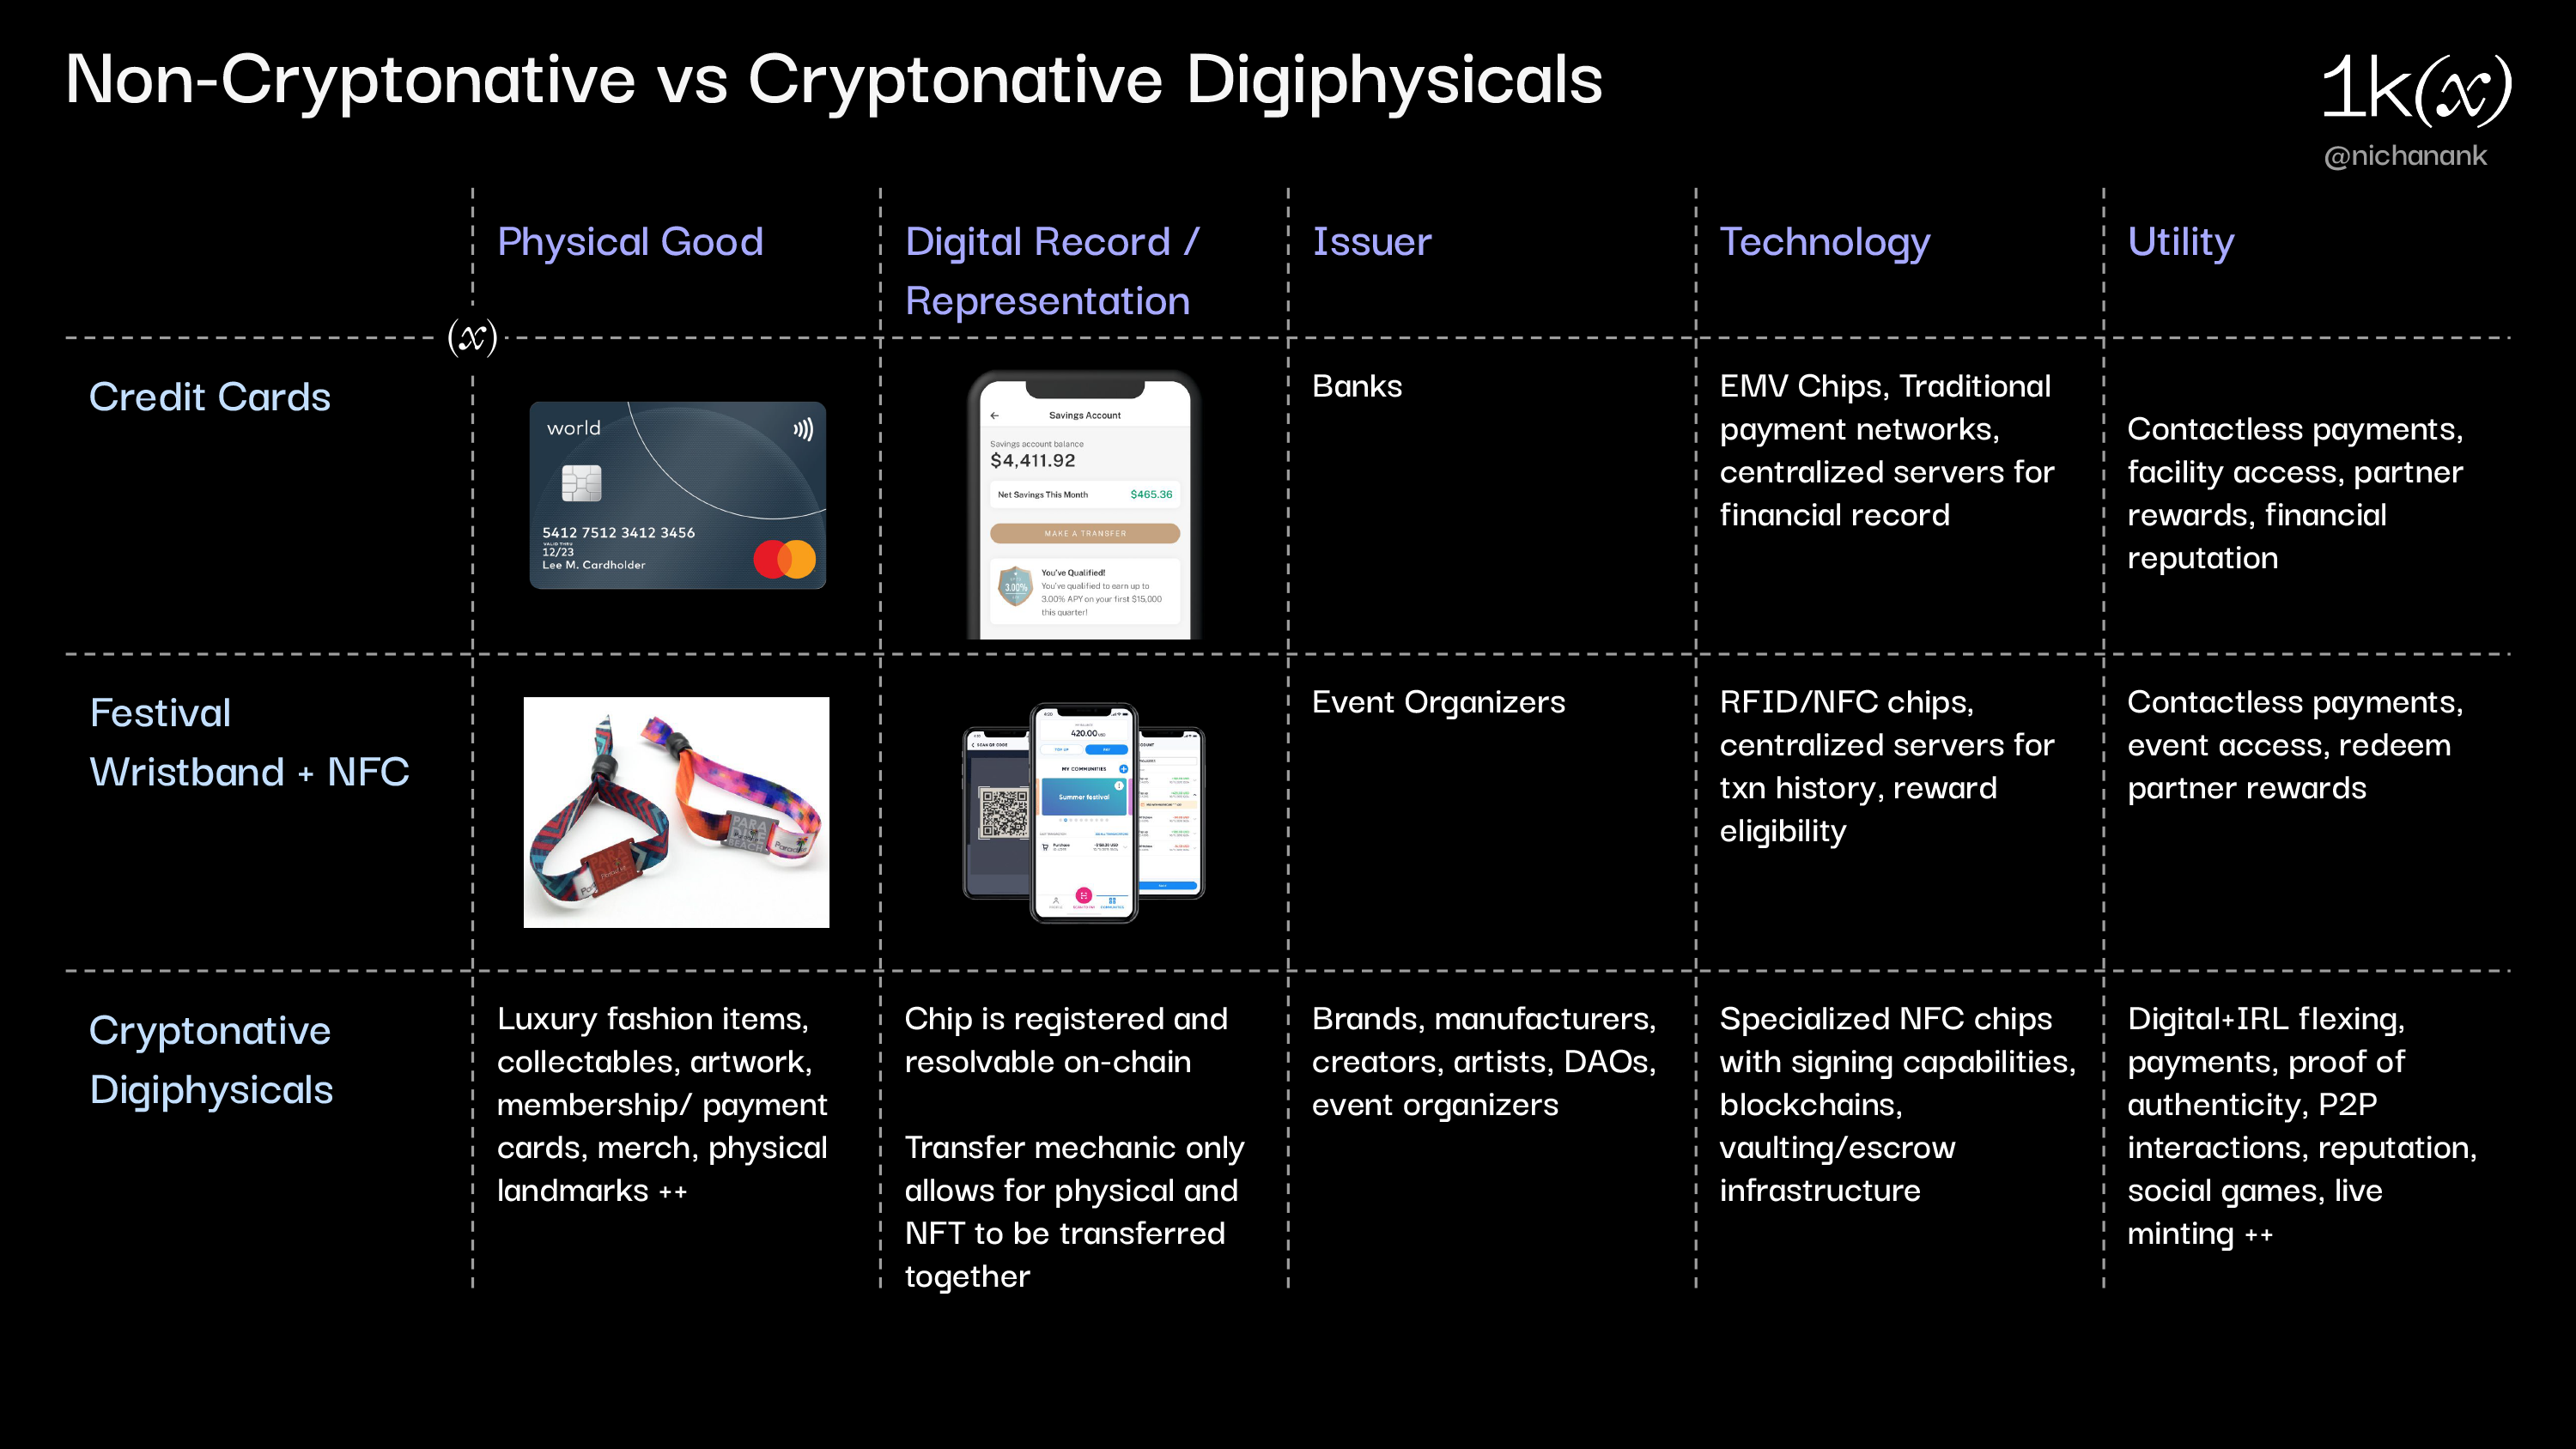 Cryptonative Digiphysicals: A physical good cryptographically linked to an onchain record